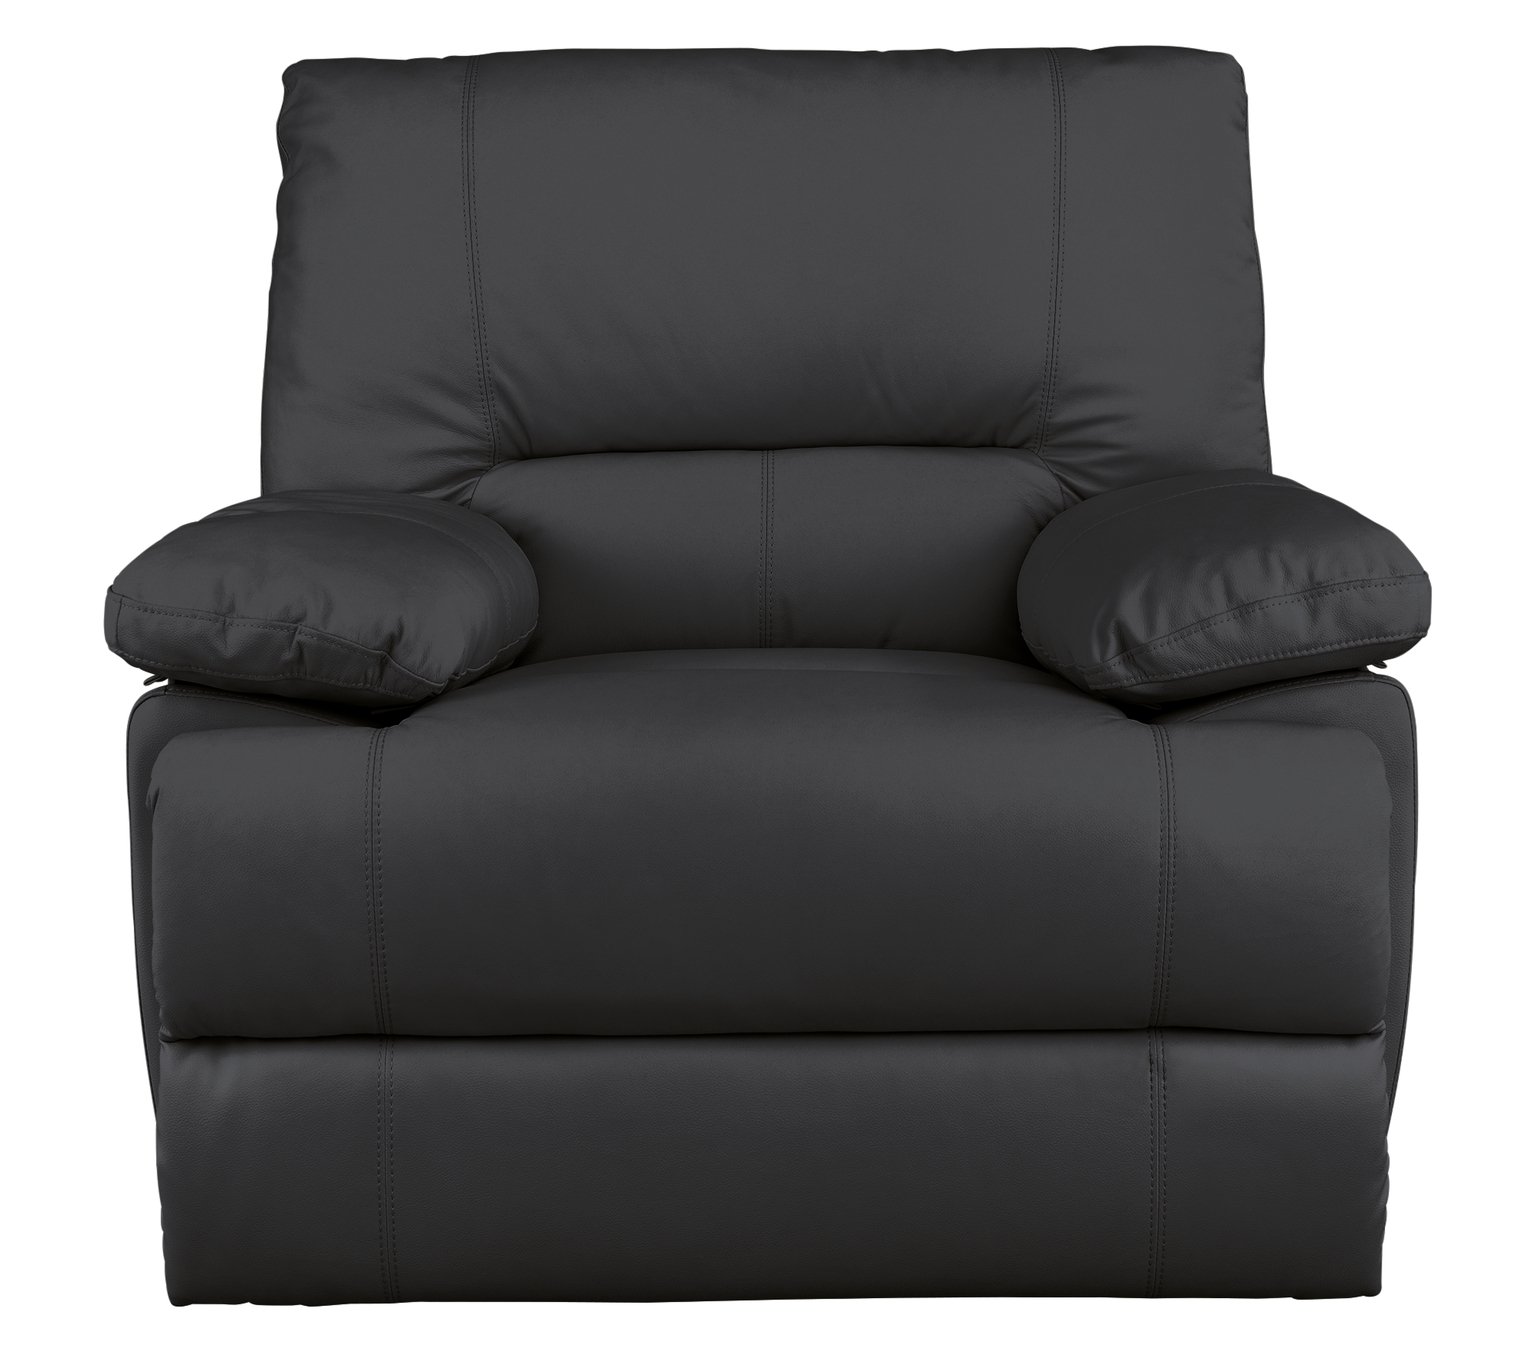 Argos Home Devlin Leather/Leather Eff Recliner Chair Reviews